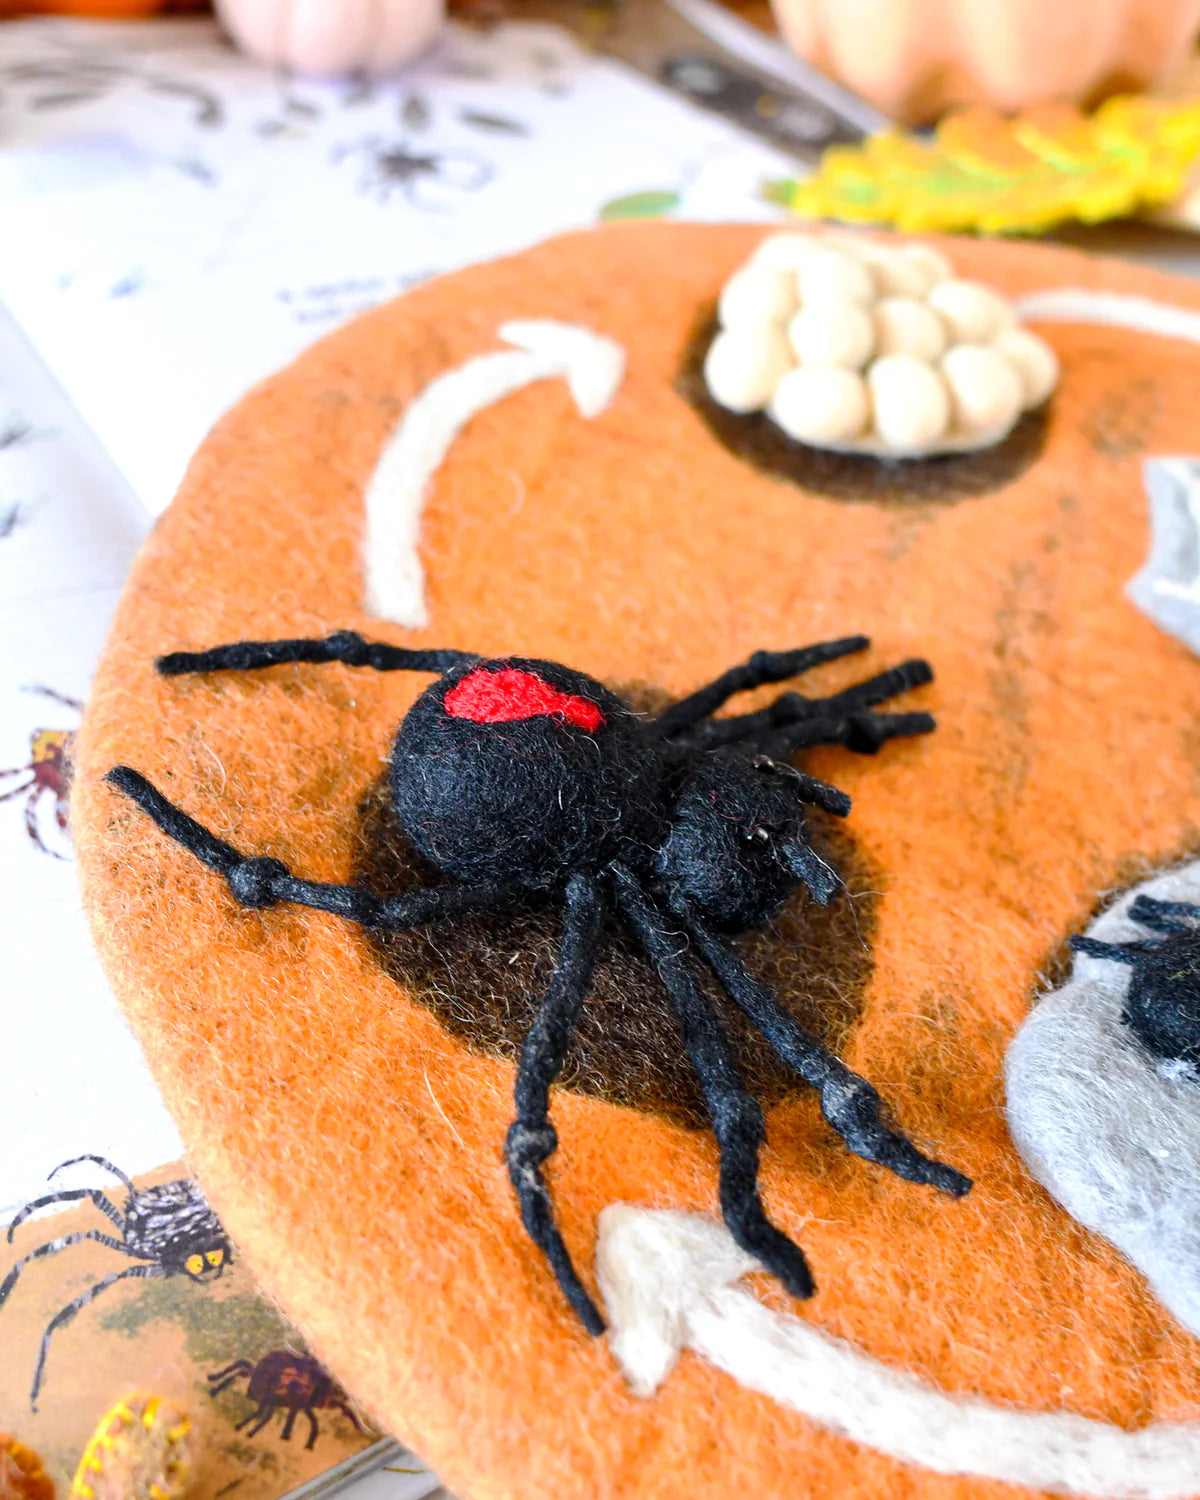 Felt Lifecycle of Redback Spider